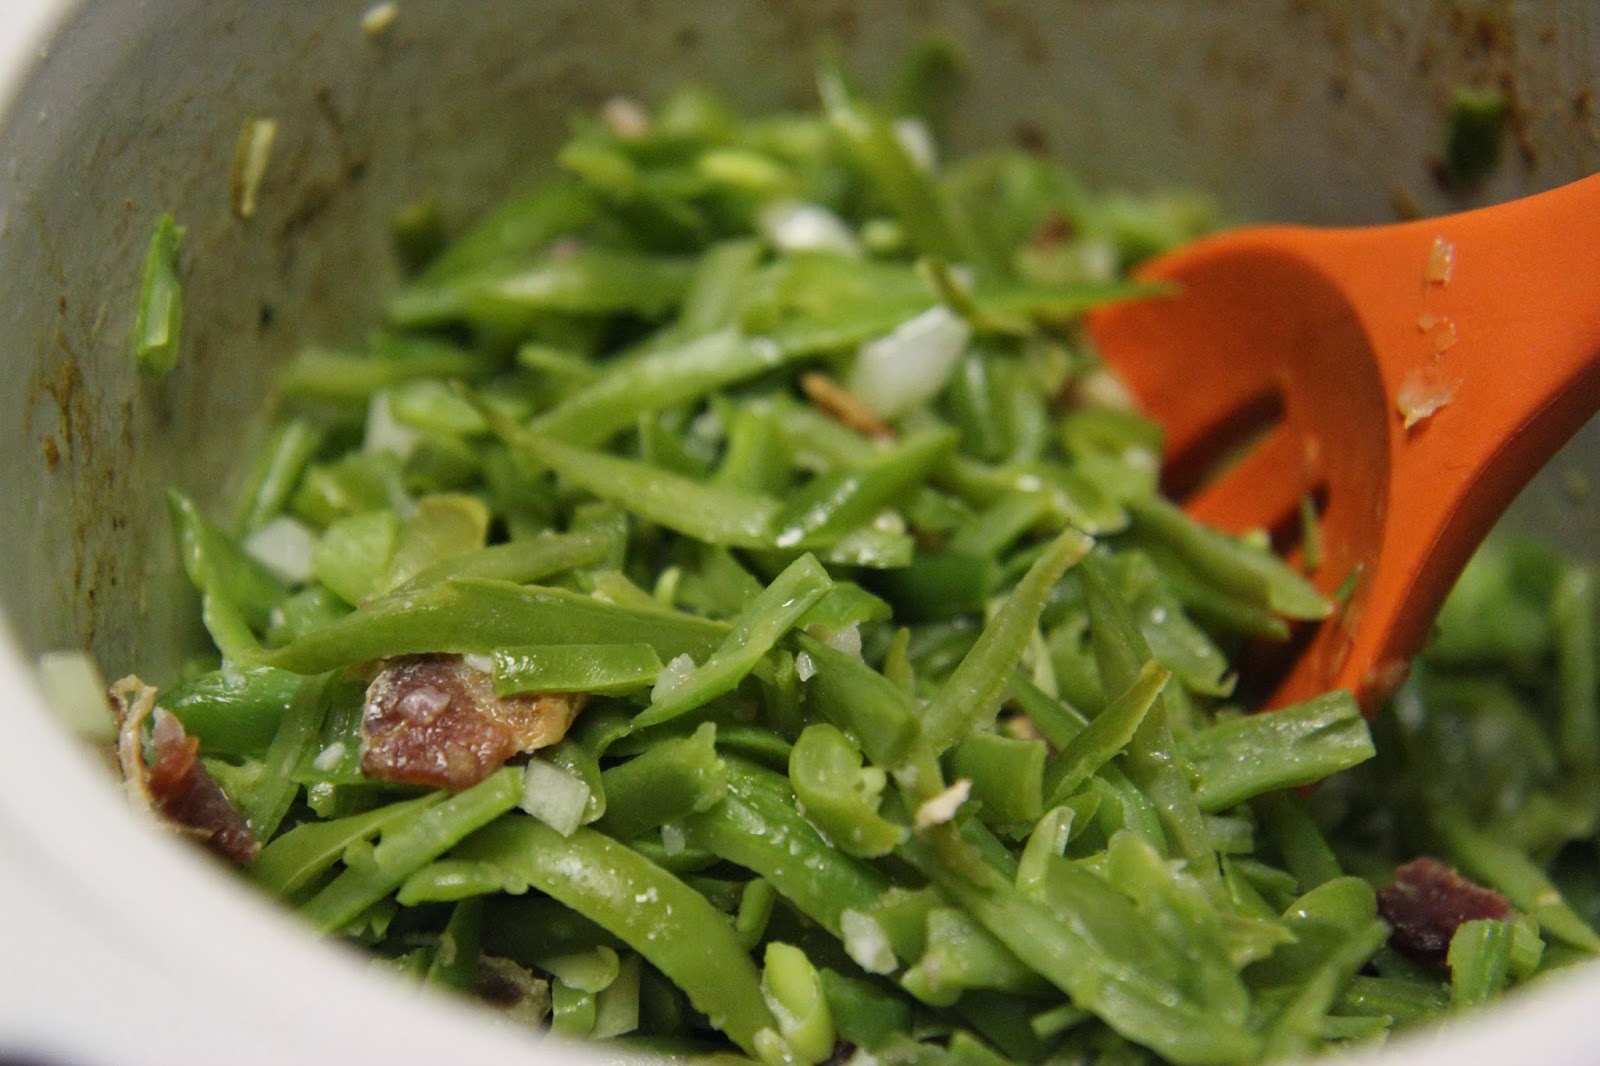 Crockpot Green Beans - Recipes From A Pantry